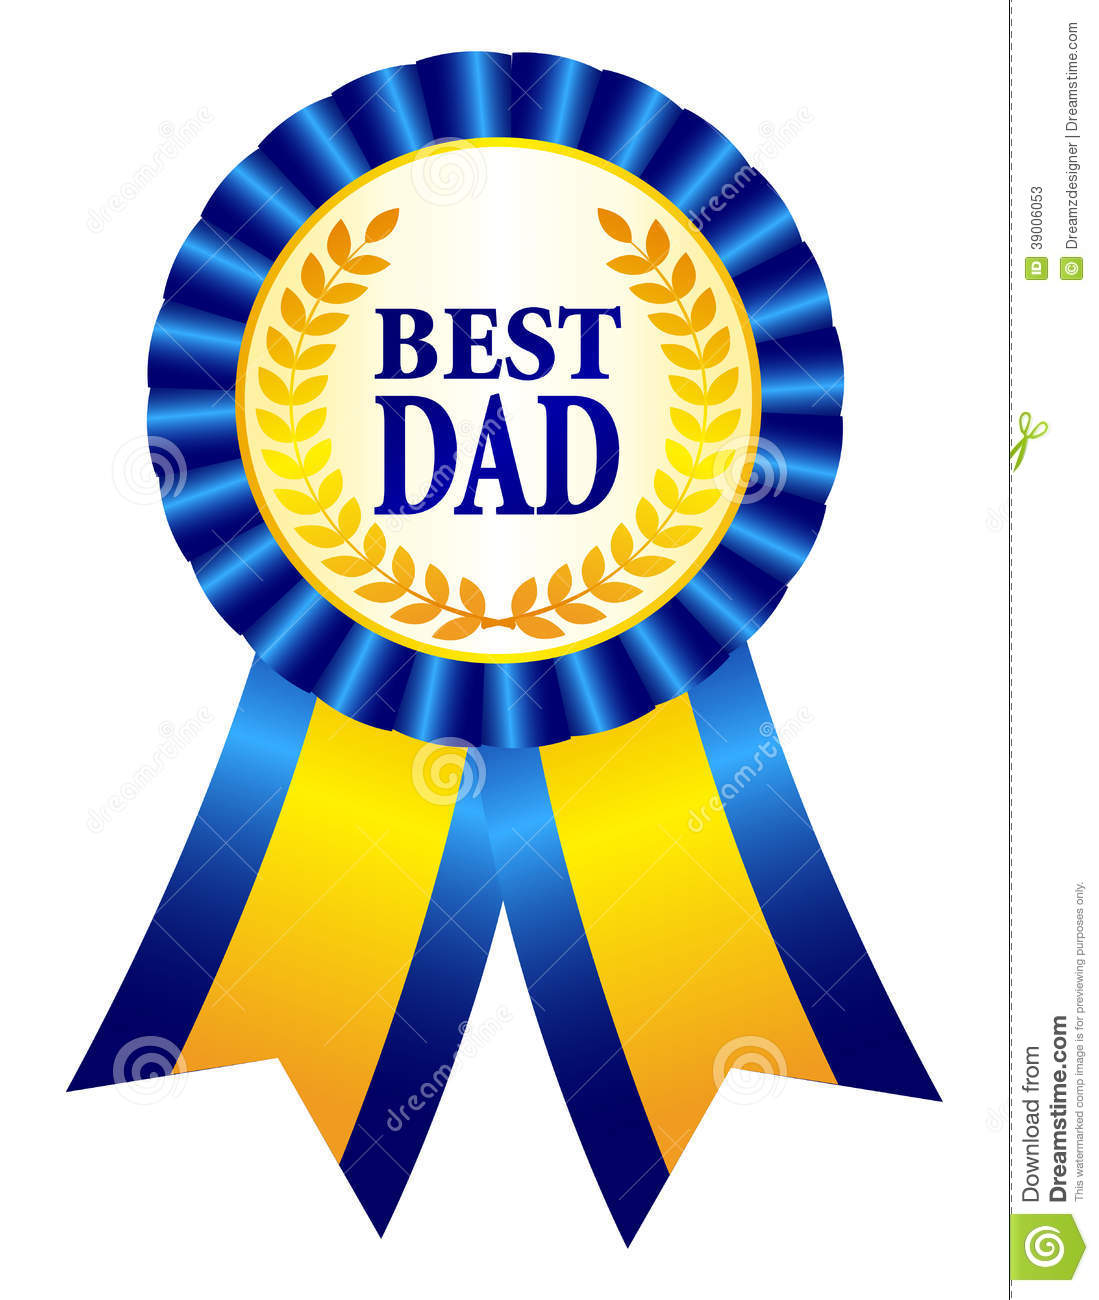 Best Dad Award Ribbon Rosette With Text And Gold Laurel Specially For    